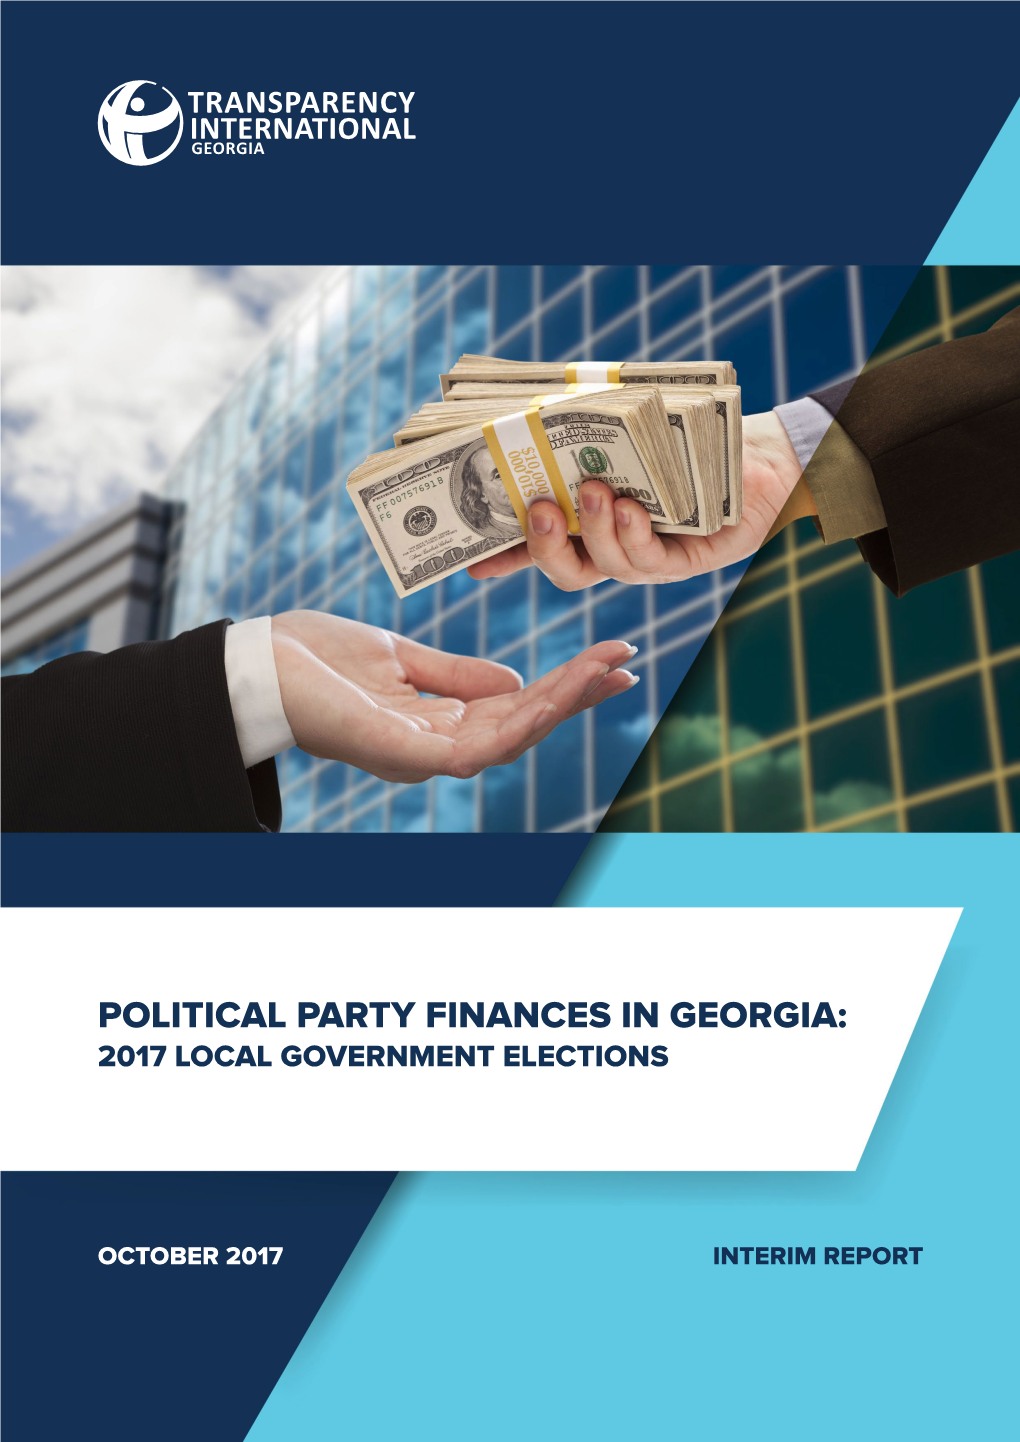 Political Party Finances in Georgia: 2017 Local Government Elections